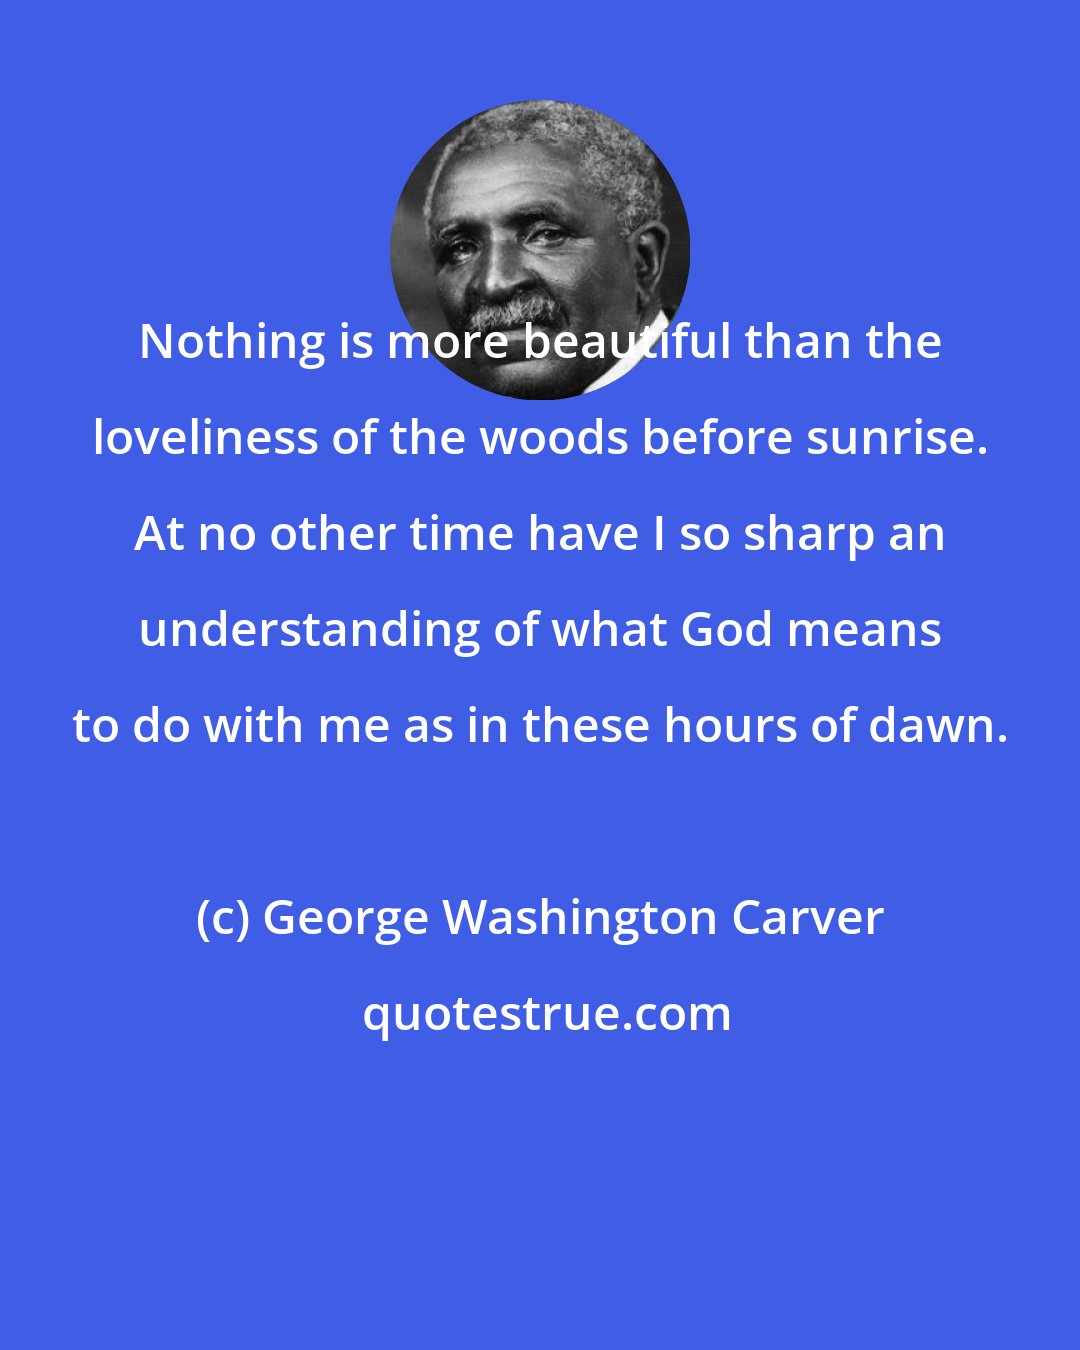 George Washington Carver: Nothing is more beautiful than the loveliness of the woods before sunrise. At no other time have I so sharp an understanding of what God means to do with me as in these hours of dawn.